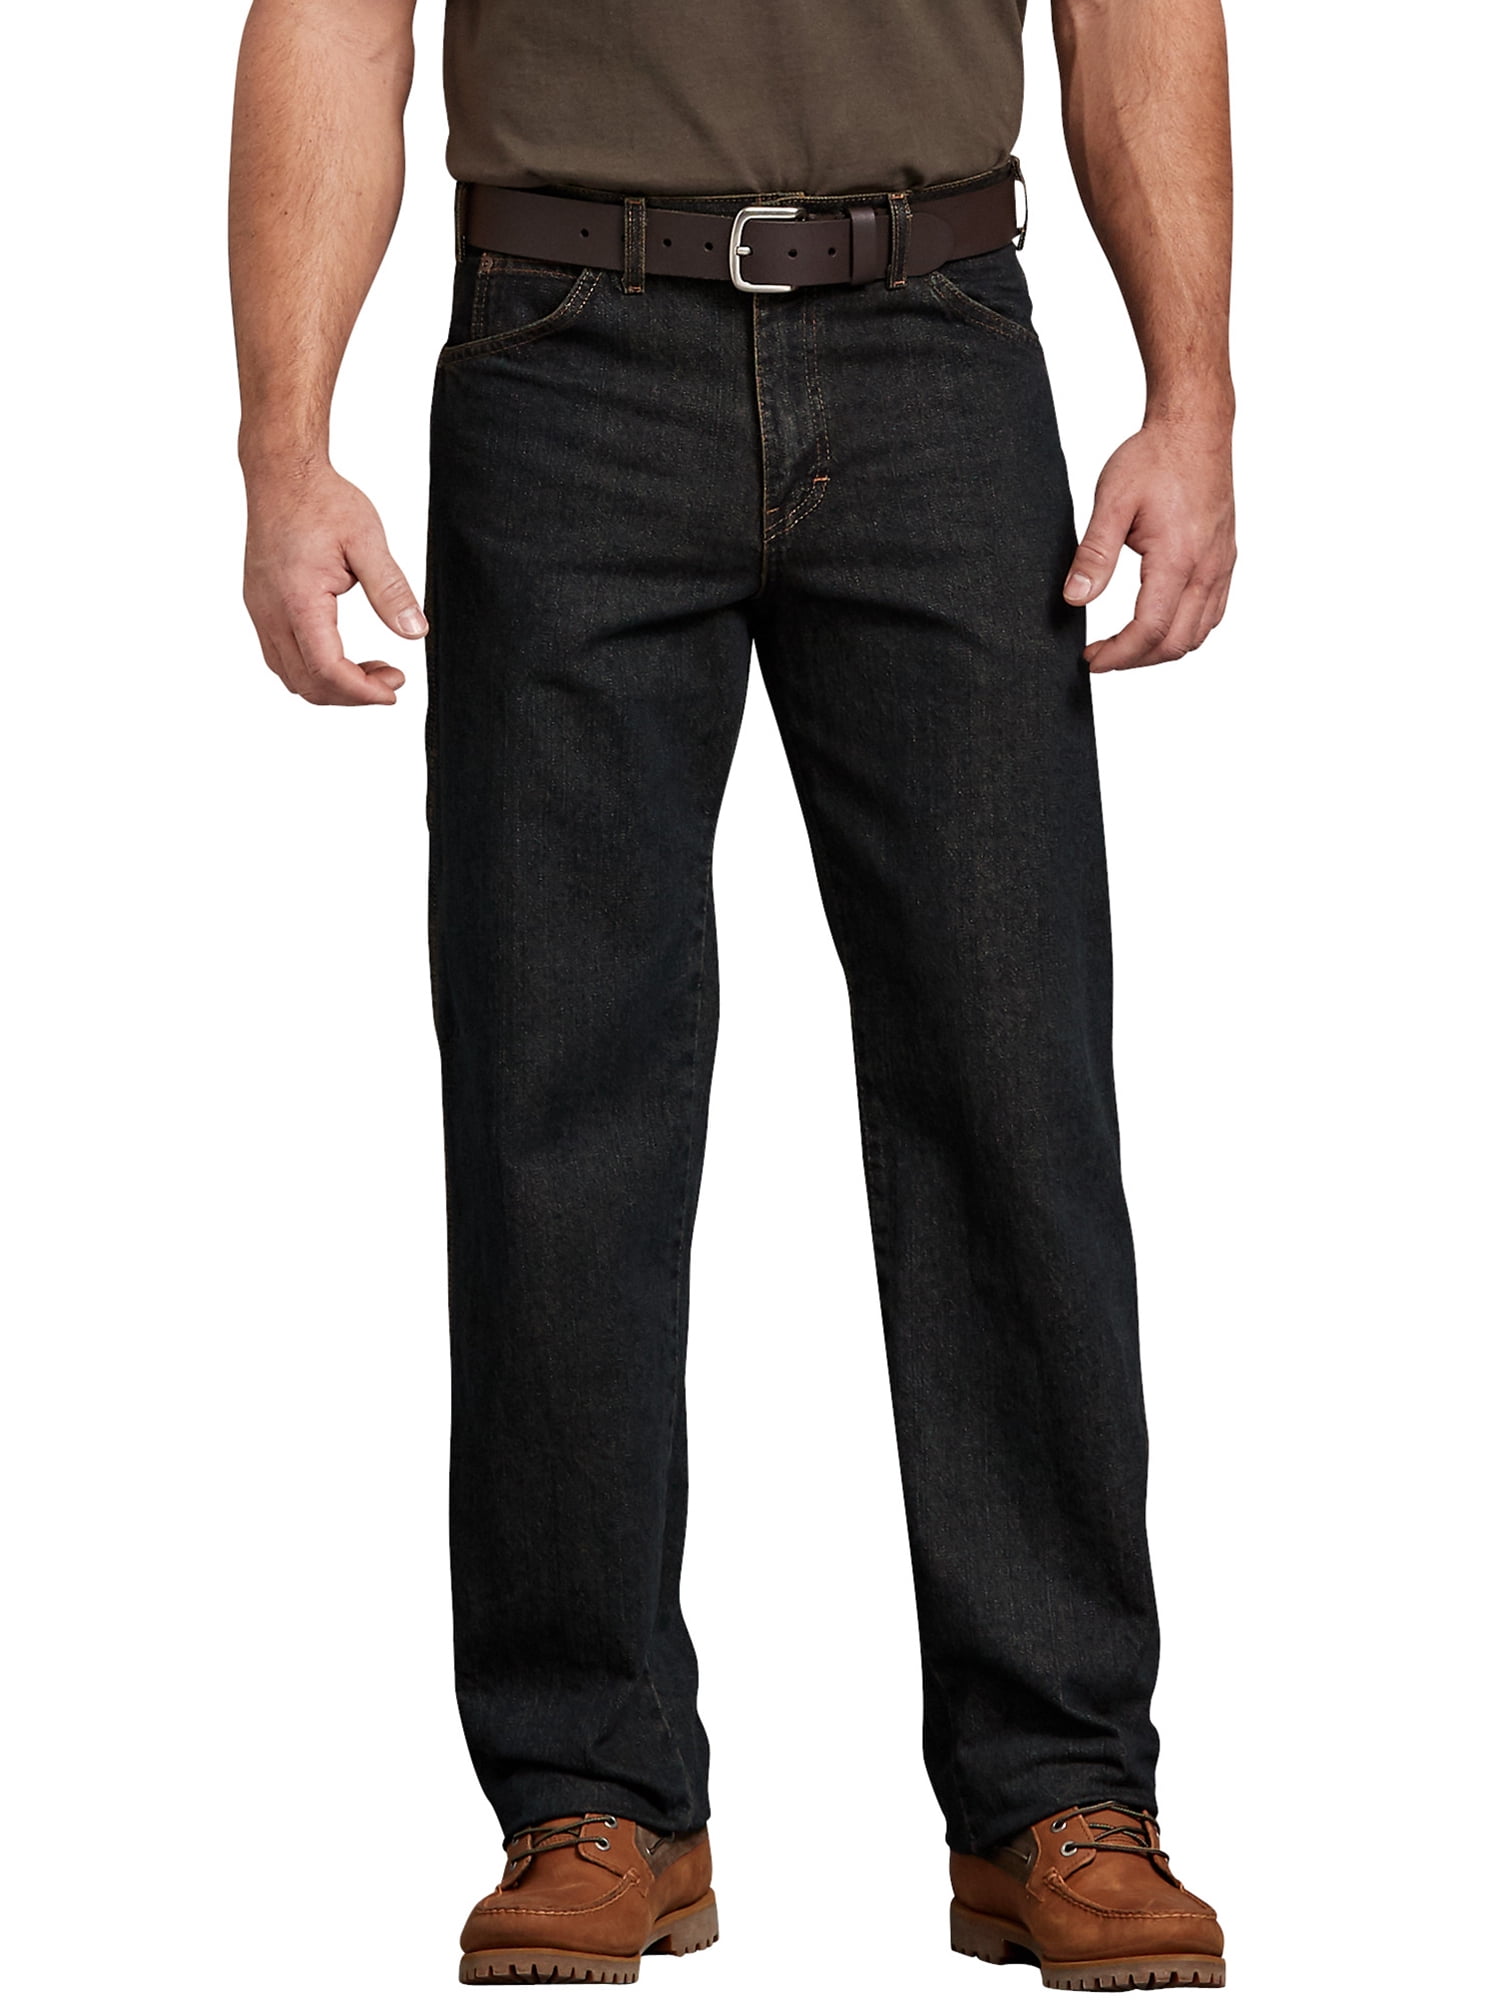 Dickies Relaxed Fit Carpenter Denim Jeans - Frank's Sports Shop